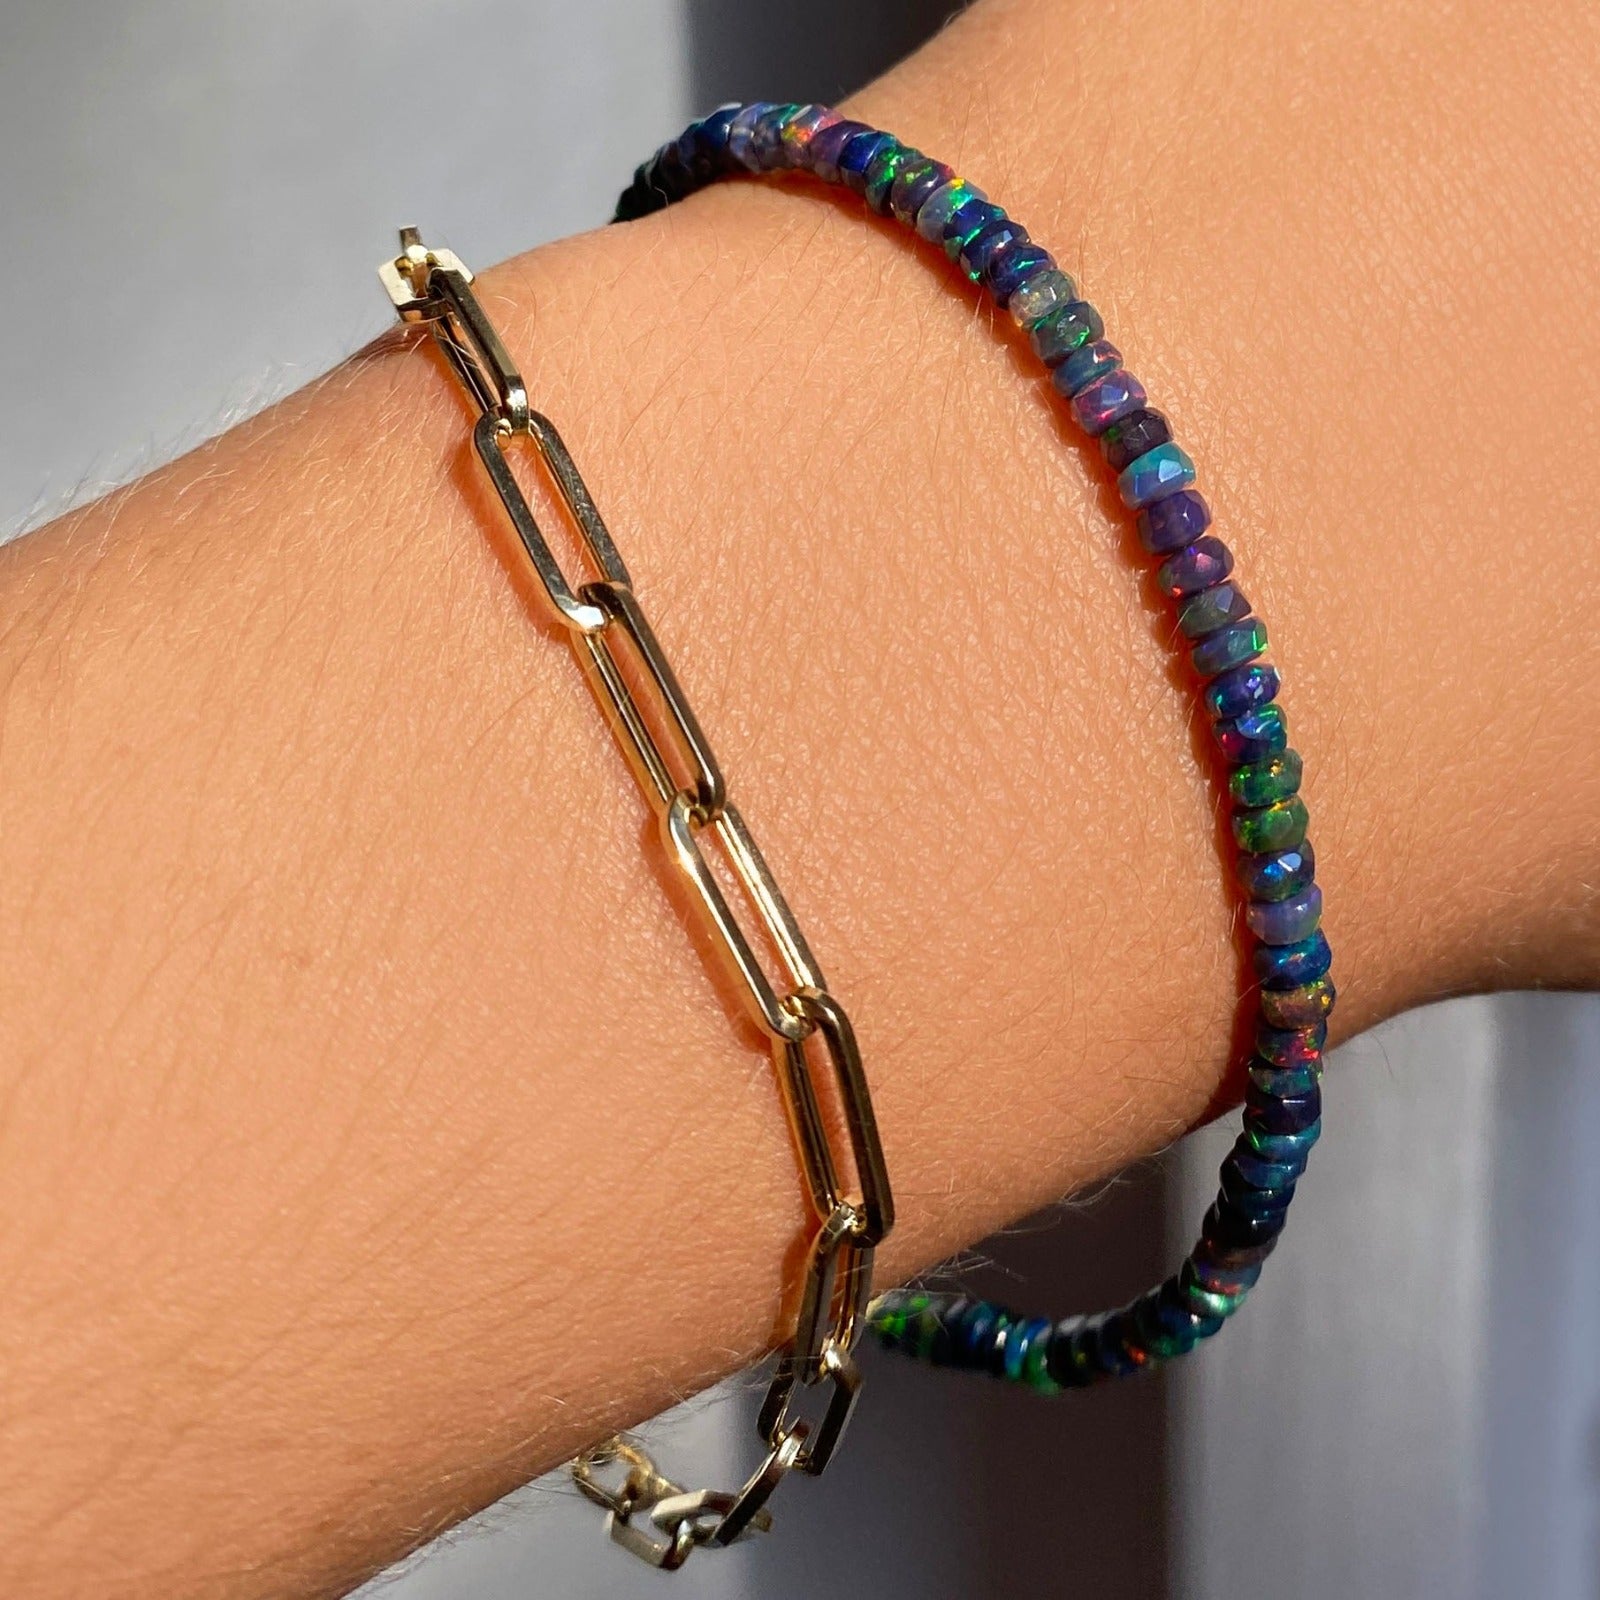 Shimmering beaded bracelet made of faceted opals in shades of black, blue, and green on a gold linking lobster clasp. Styled on a wrist layered with a chunky paperclip chain bracelet.